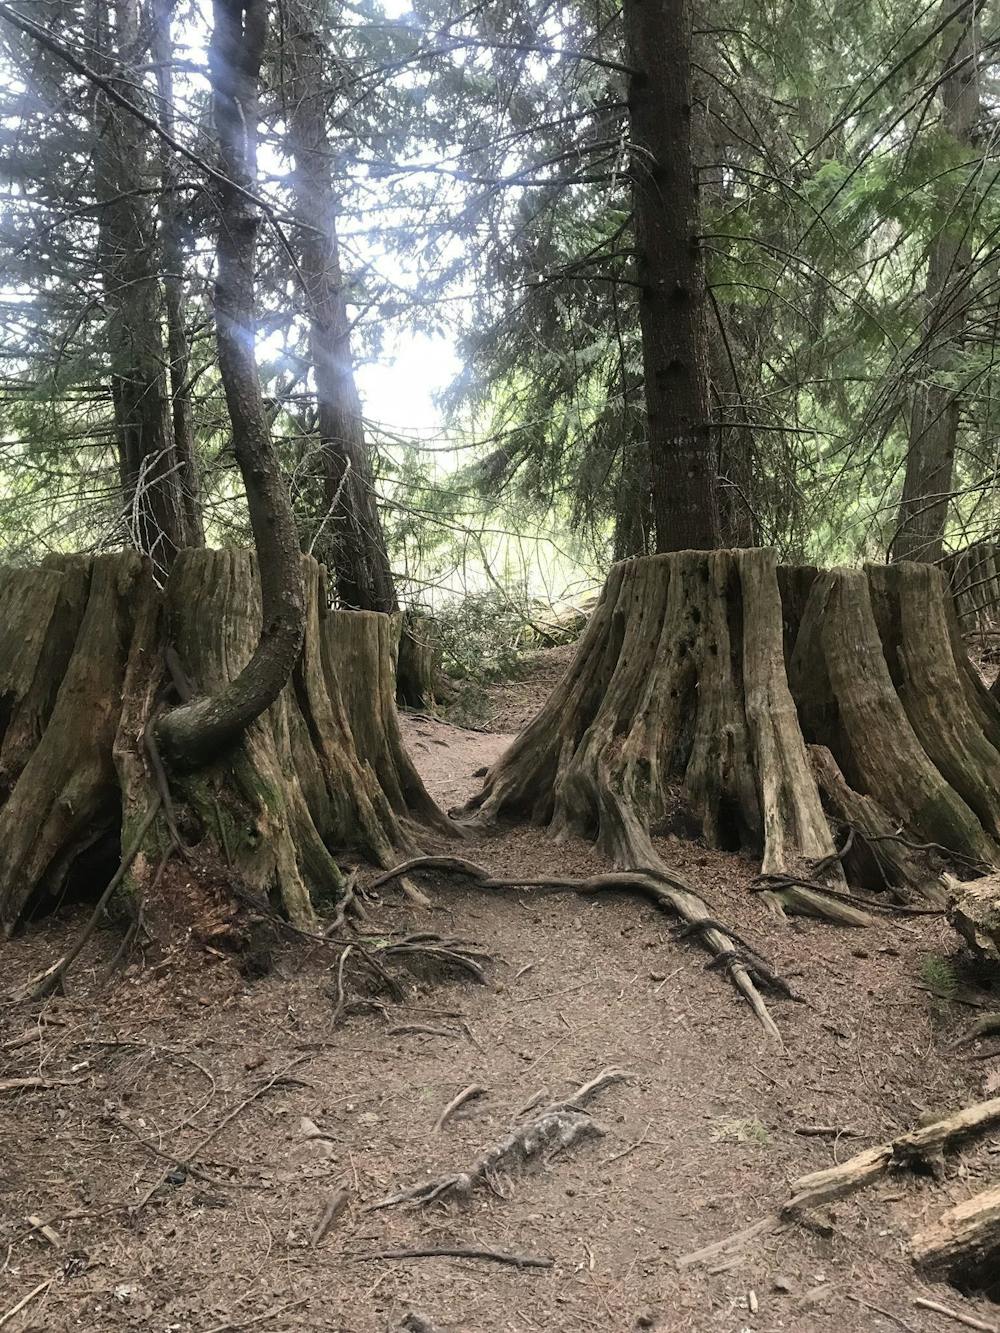 Old Growth creating life for new growth